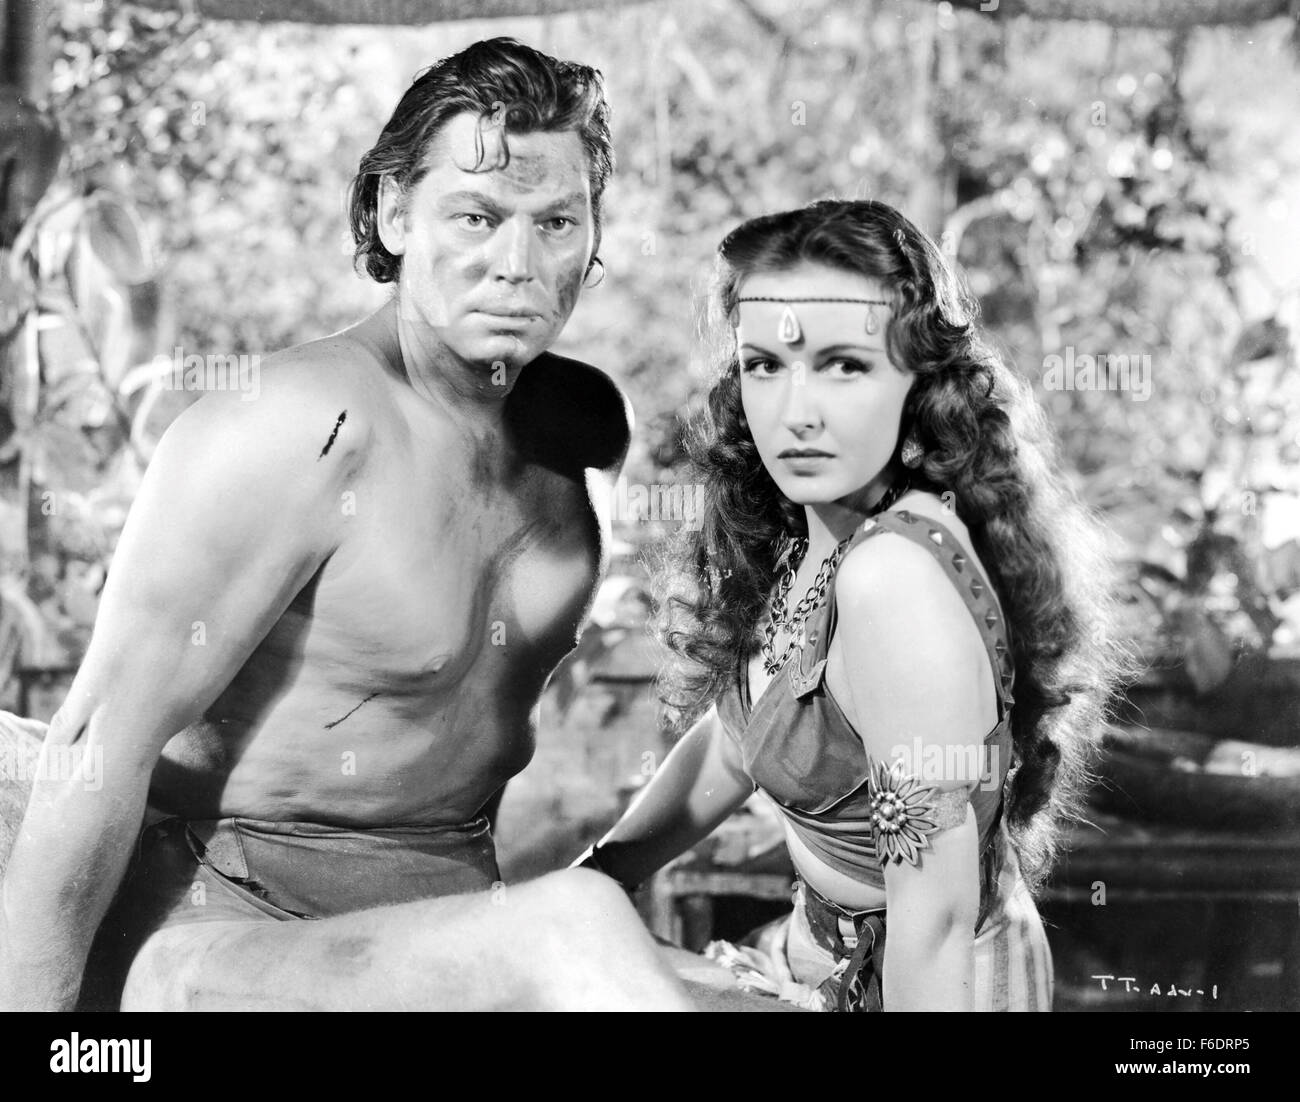 All 95+ Images what is the title of the first tarzan movie of the silent era? Stunning